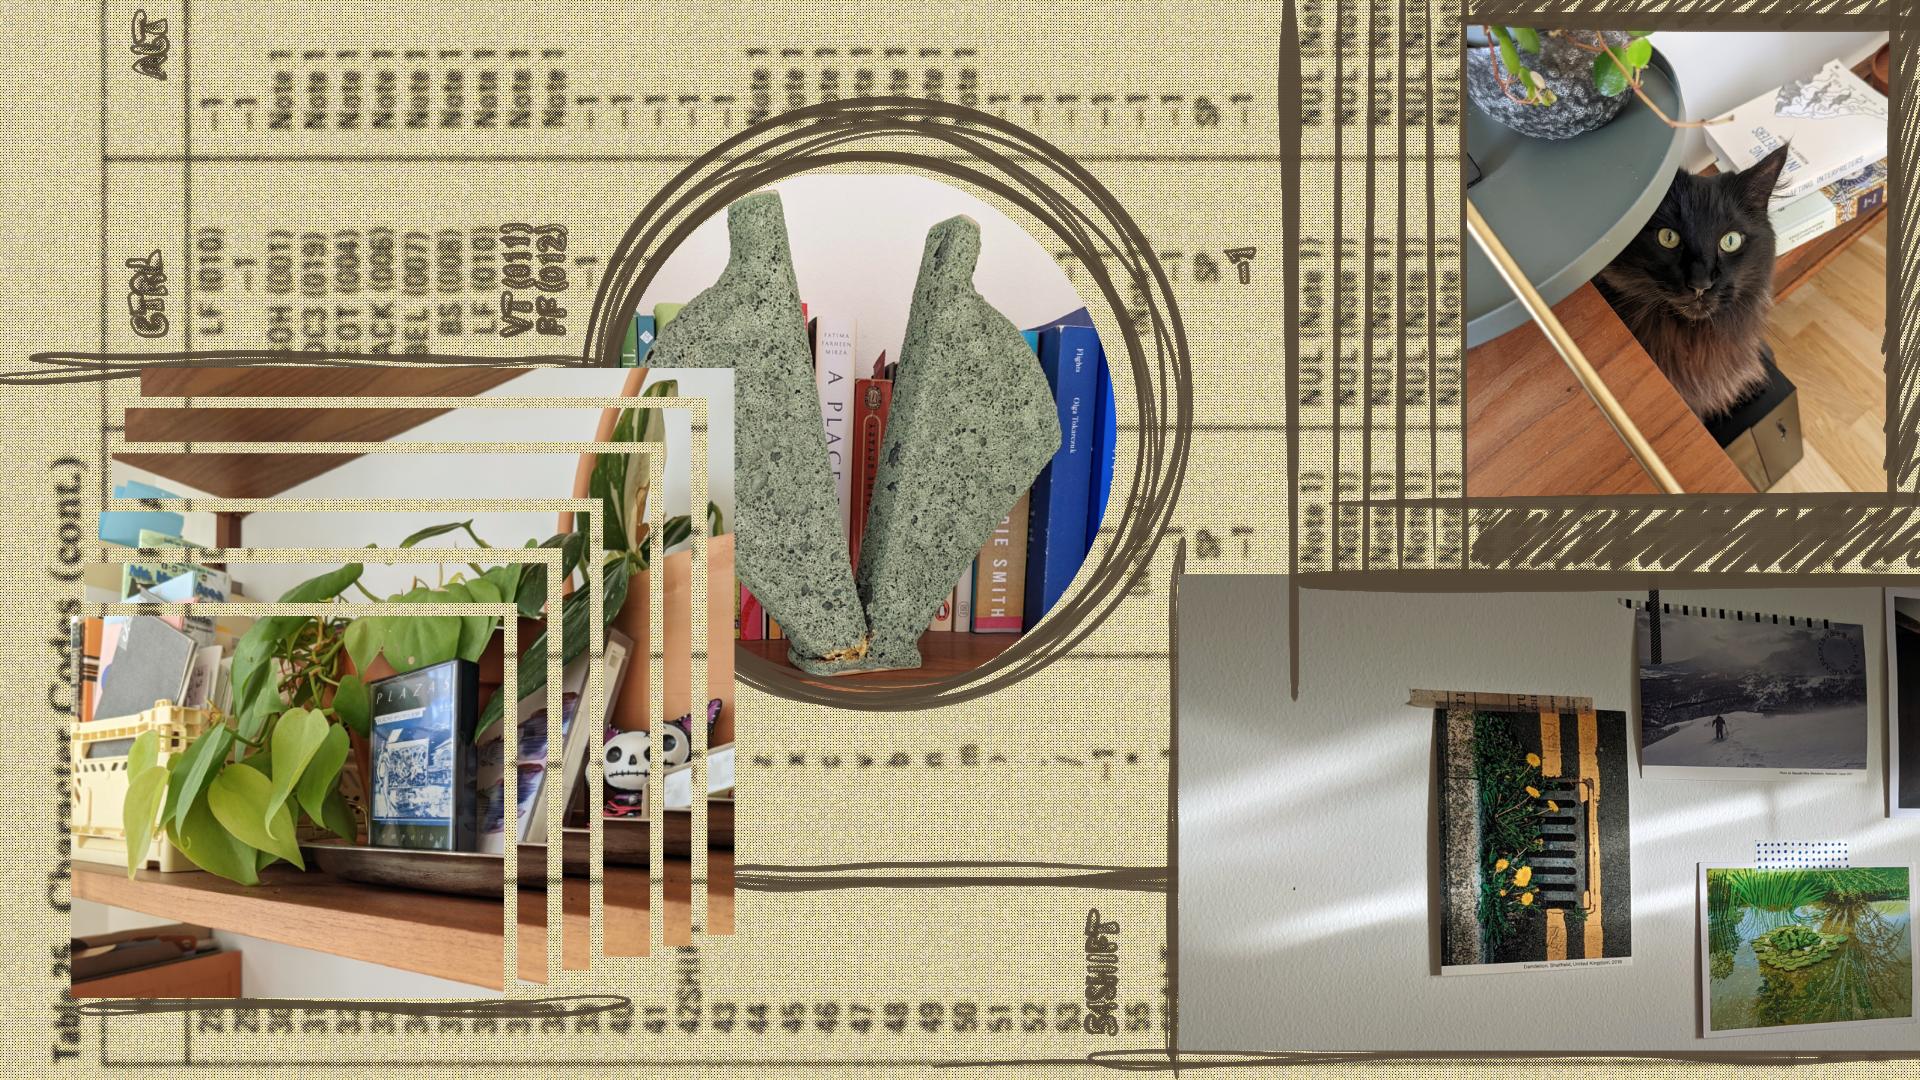 An image collage overtop of blurred out, pixelated IBM instruction manual. Images include a black fluffy cat peeking at the camera sitting on top of a computer, postcards on a wall with sunlight seeping through, cutup photograph of plants on a tray with two cassettes next to them, and a mossy green split vase standing in front of books. The collage is drawn all over in slightly jagged lines.